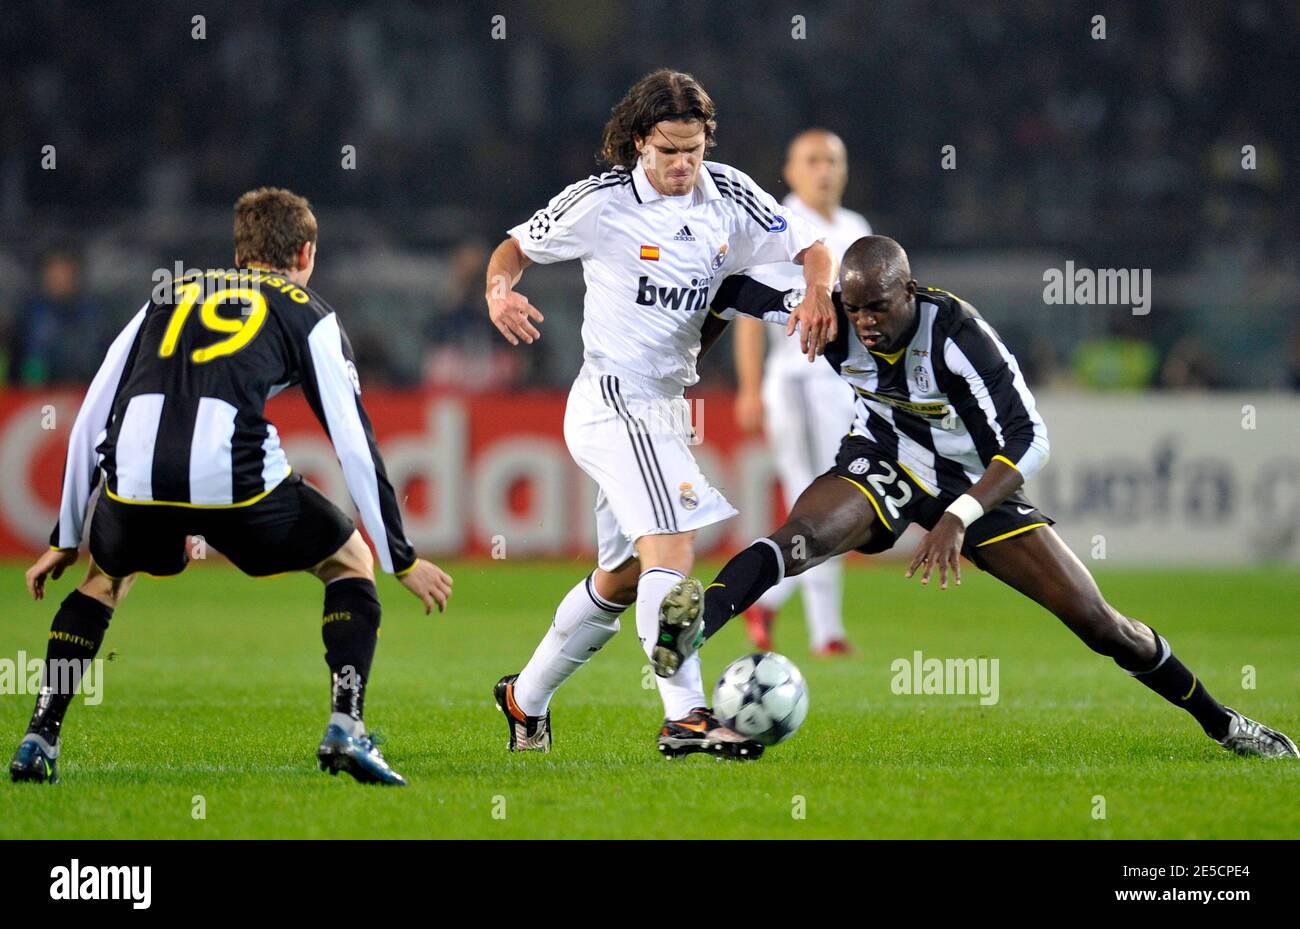 Juventus' Mohamed Sissoko and Real Madrid's Fernando Gago during the  Champions League soccer match, Juventus FC vs Real Madrid CF at the Olympic  stadium in Turin, Italy on October 21, 2008. Juventus